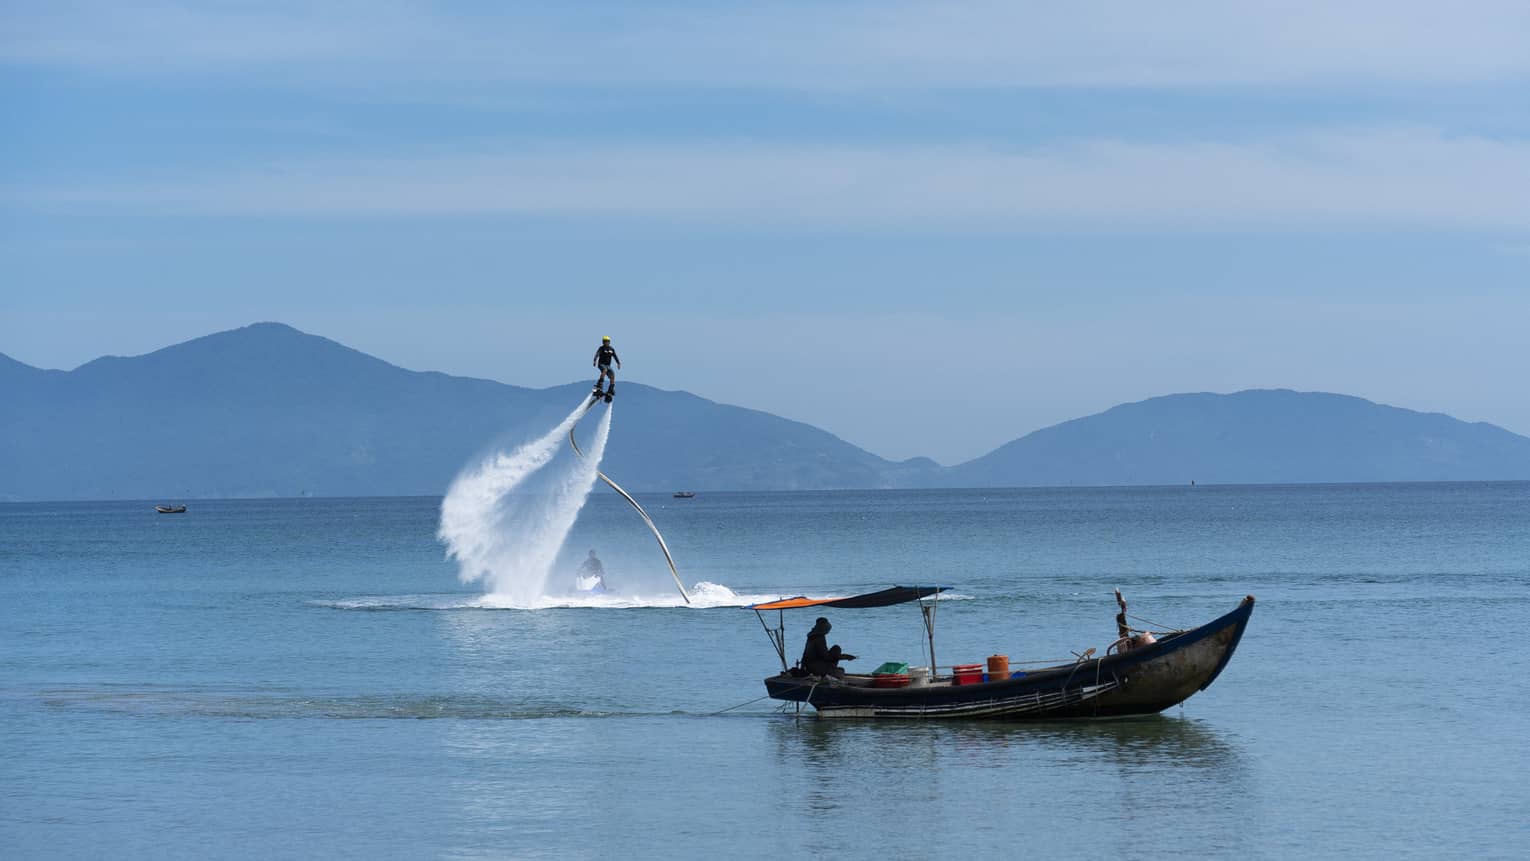 Man on X-jetpack and man in fishing boat out on the open water, mountain views and blue skies